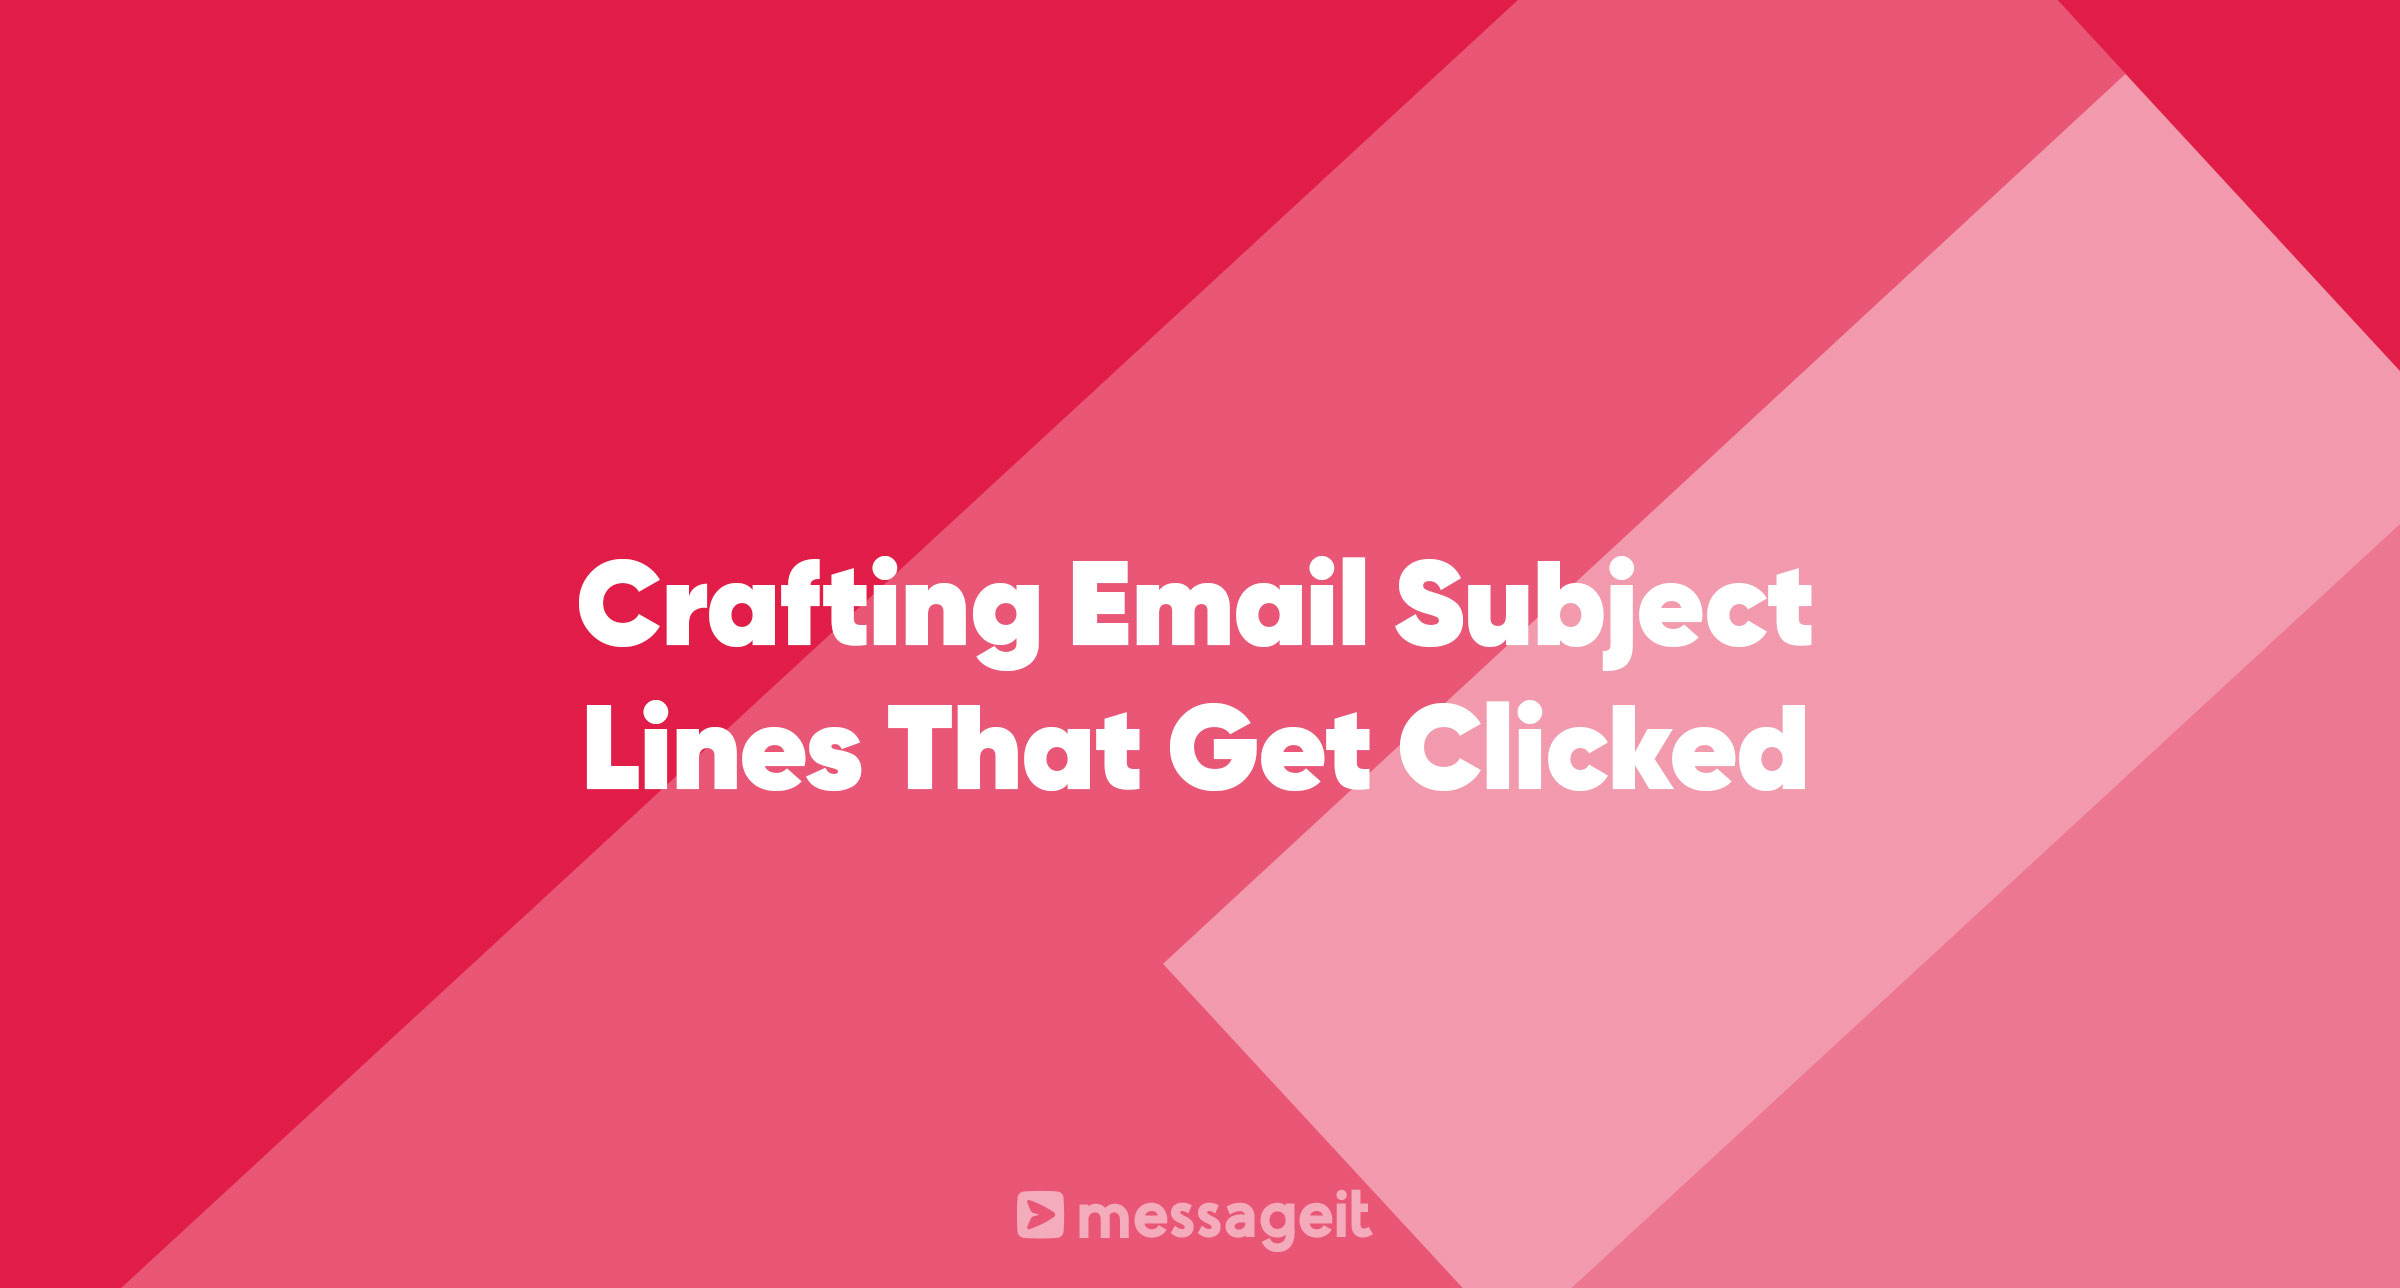 Article | Crafting Email Subject Lines That Get Clicked